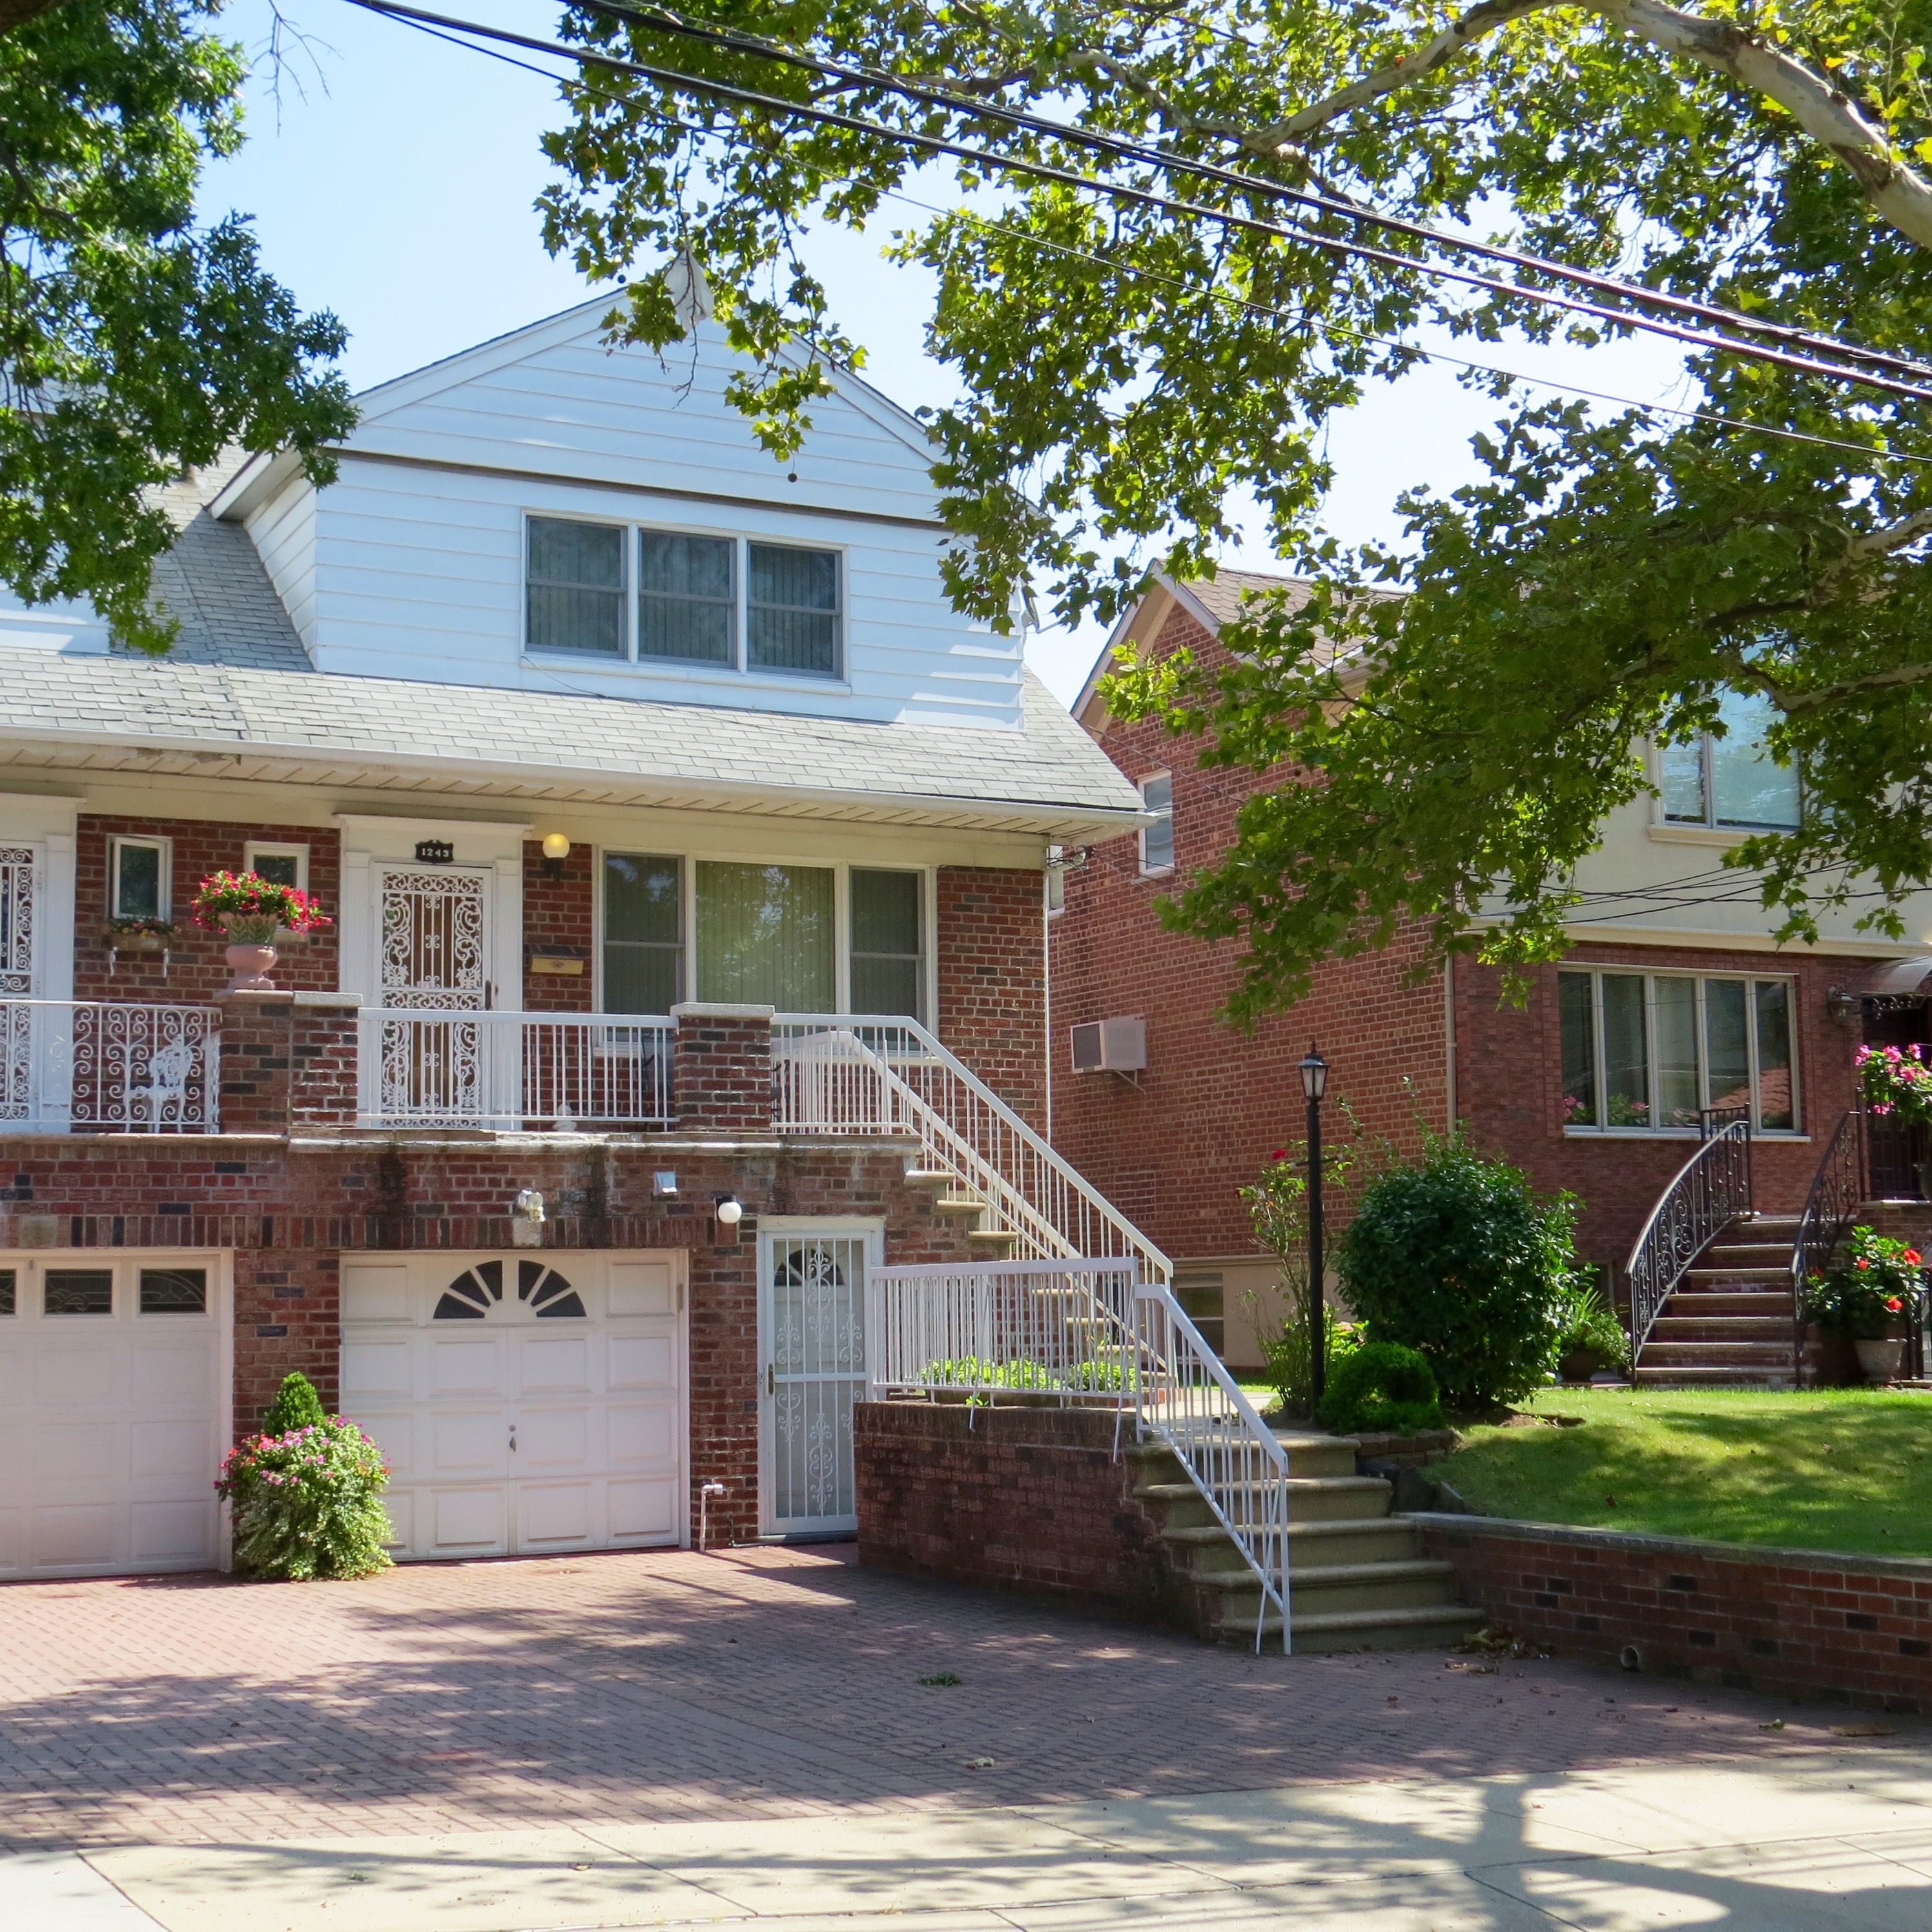 12 82nd maguire real estate brooklyn ny